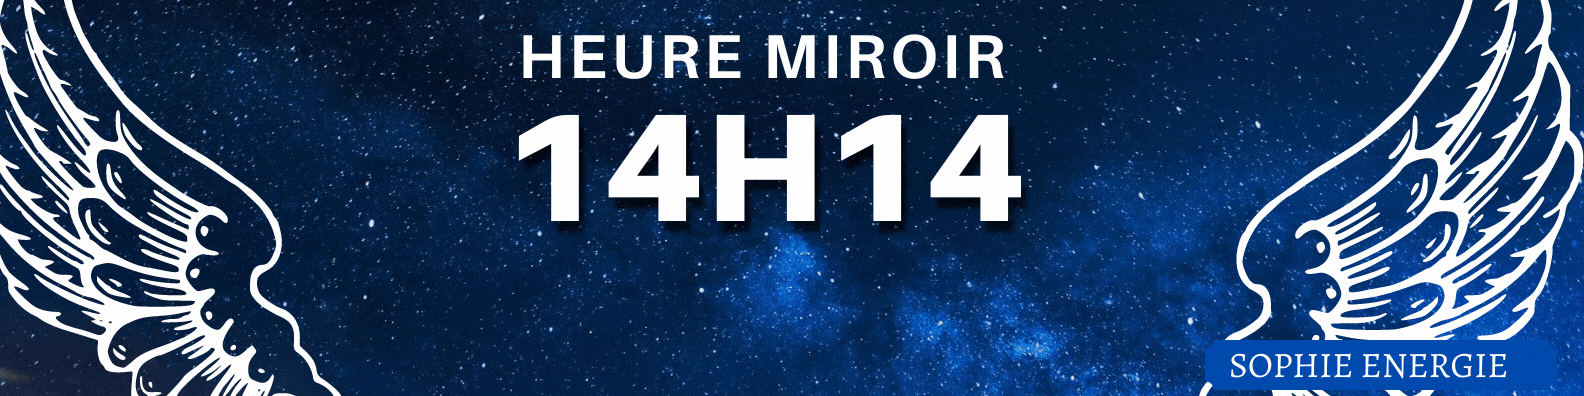 HEURE MIROIR anges 14h14